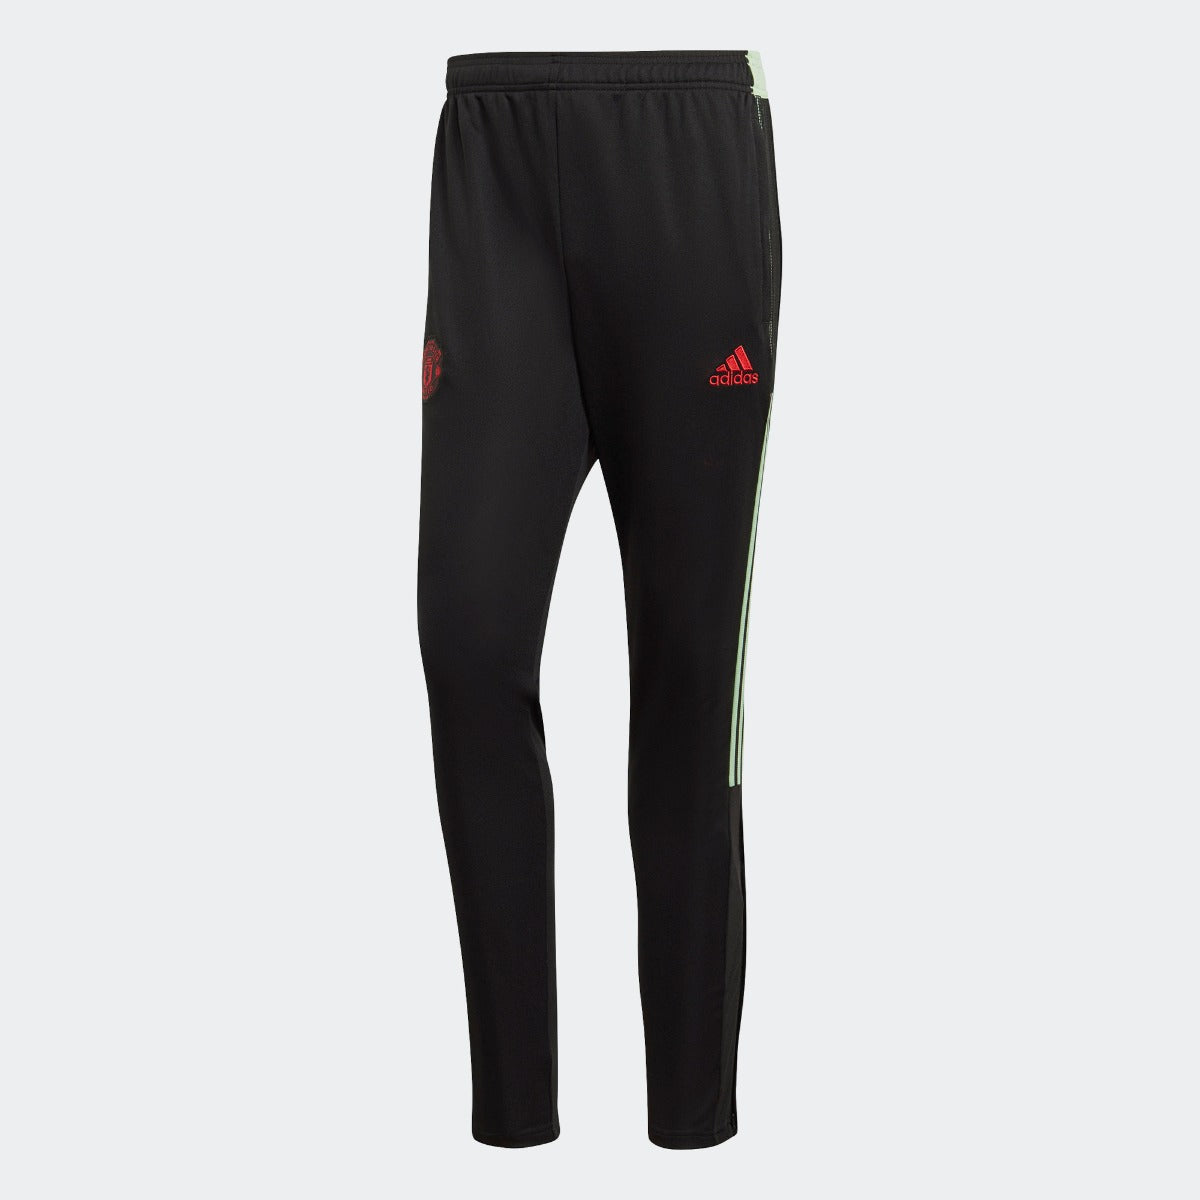 Adidas 2021 Manchester United Pants - Black (Front)